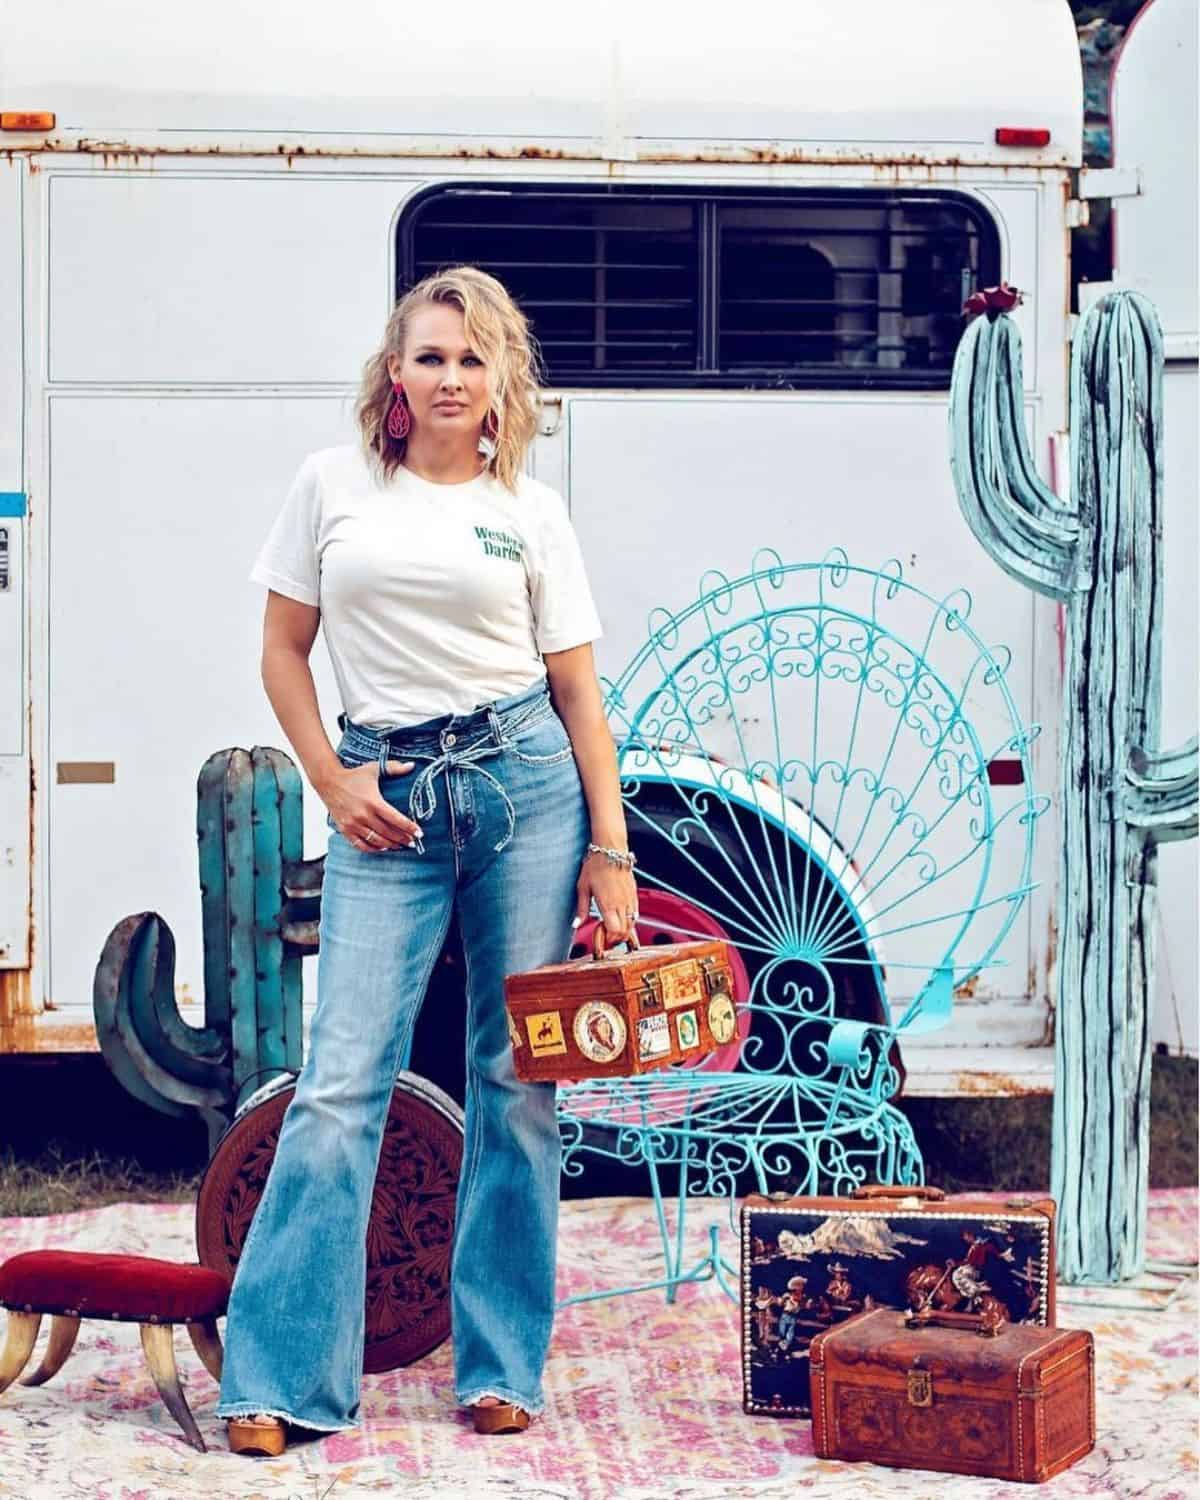 A woman stands infront of a white horse trailer.